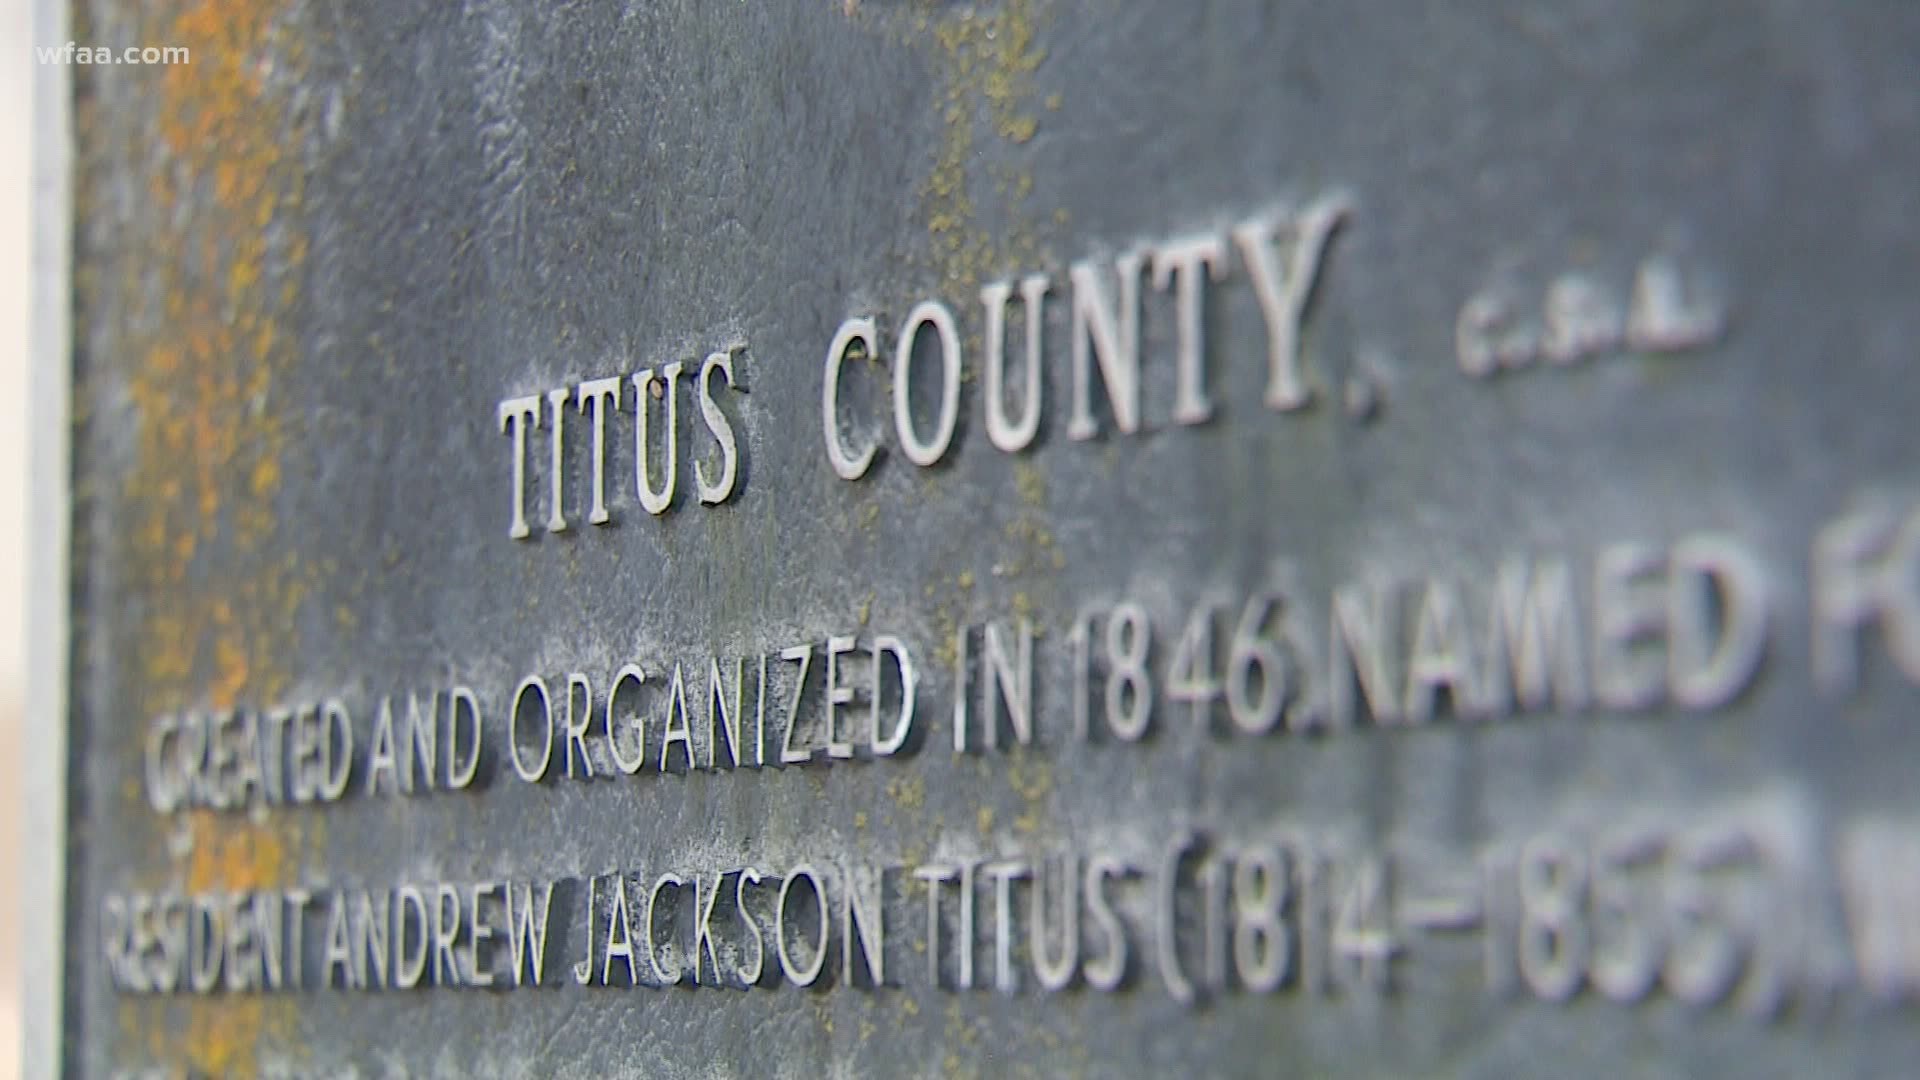 Only three Texas counties have more cases per person right now than Titus County.